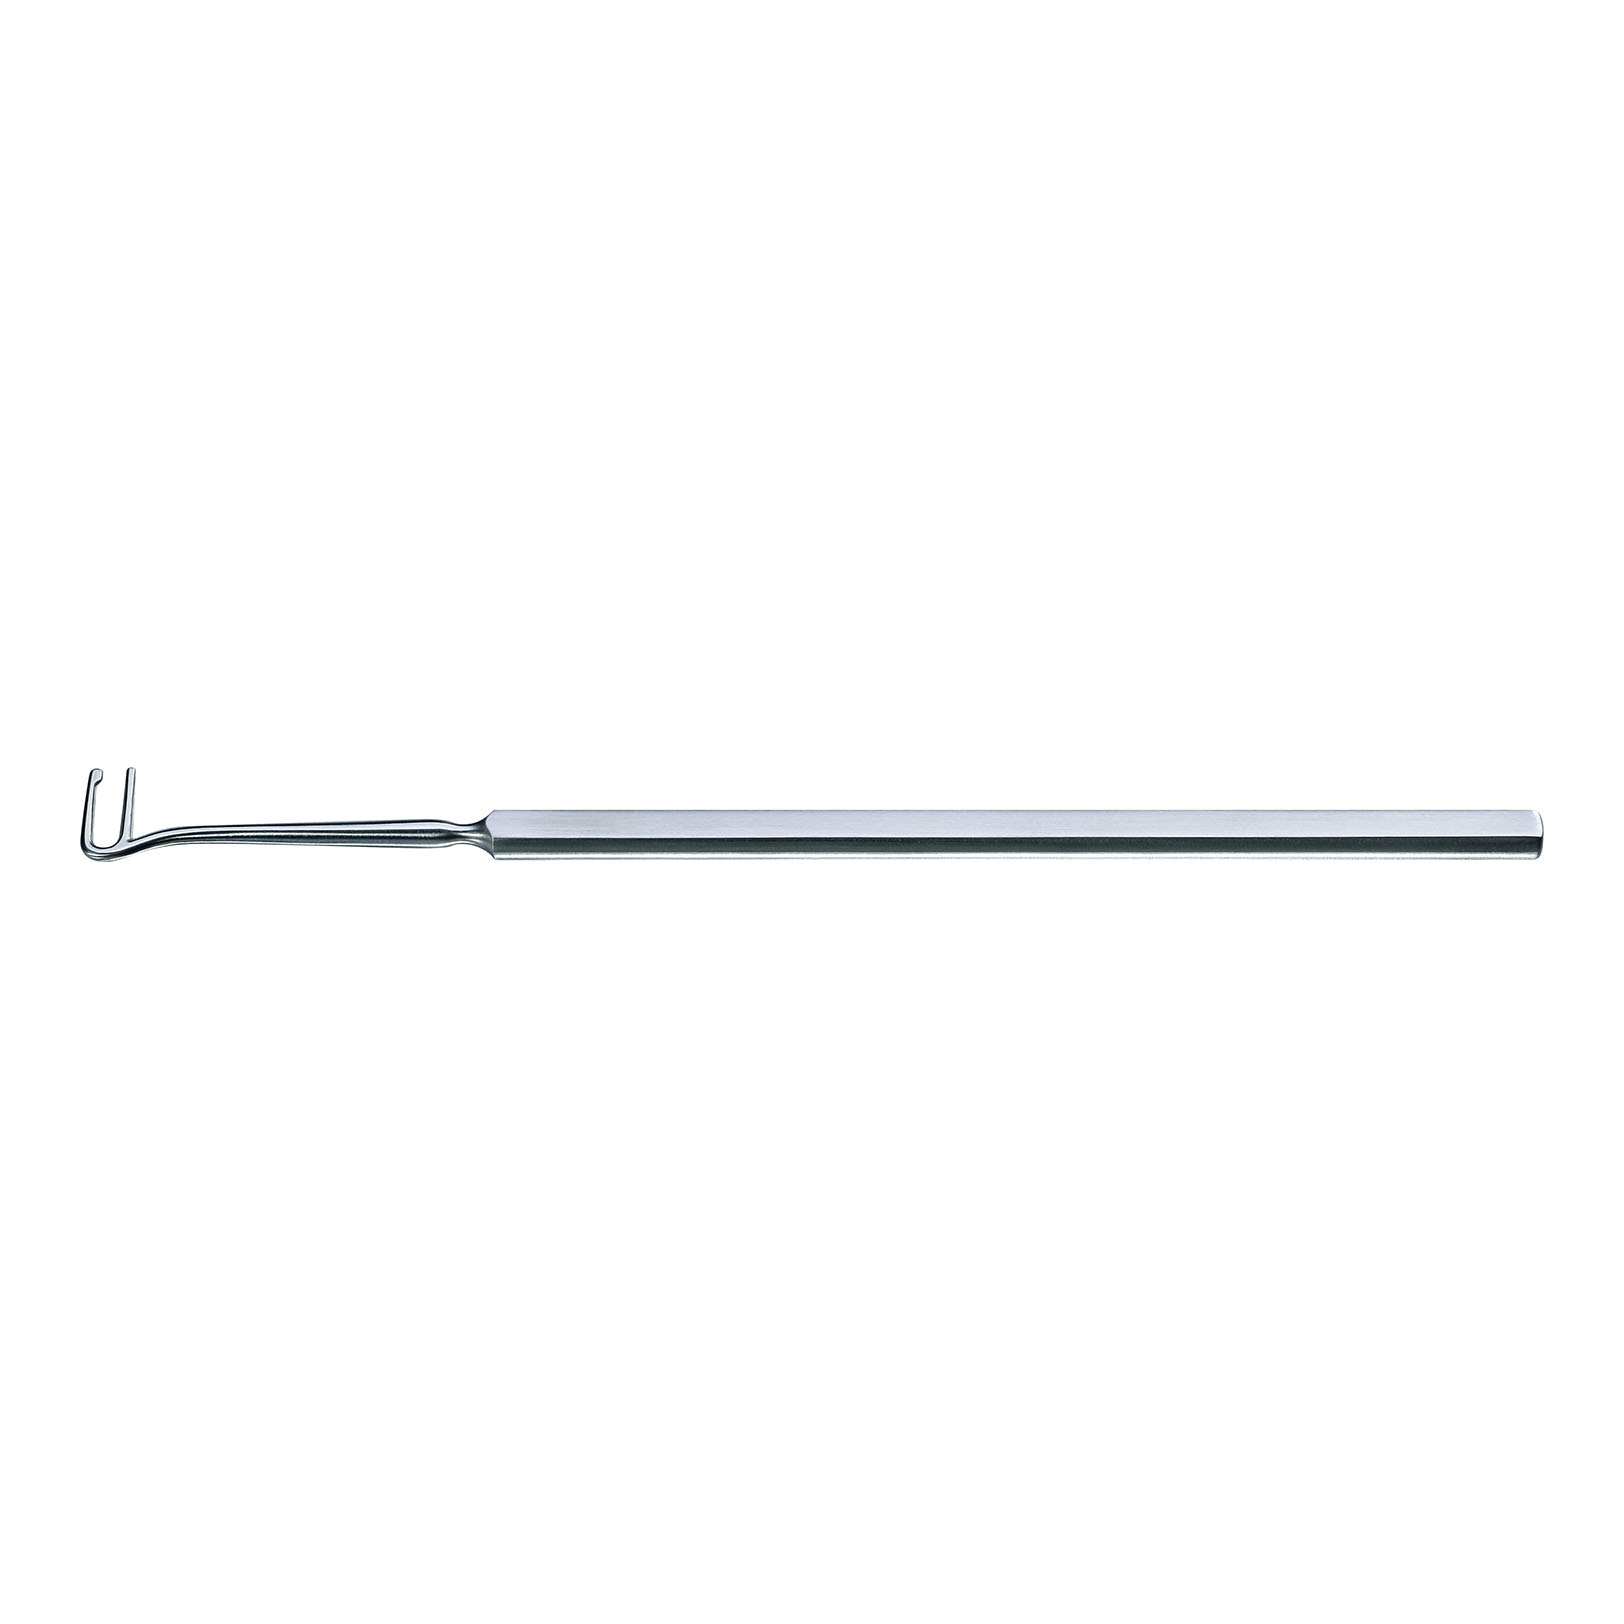 IF-8126 Stainless Steel Muscle Hook